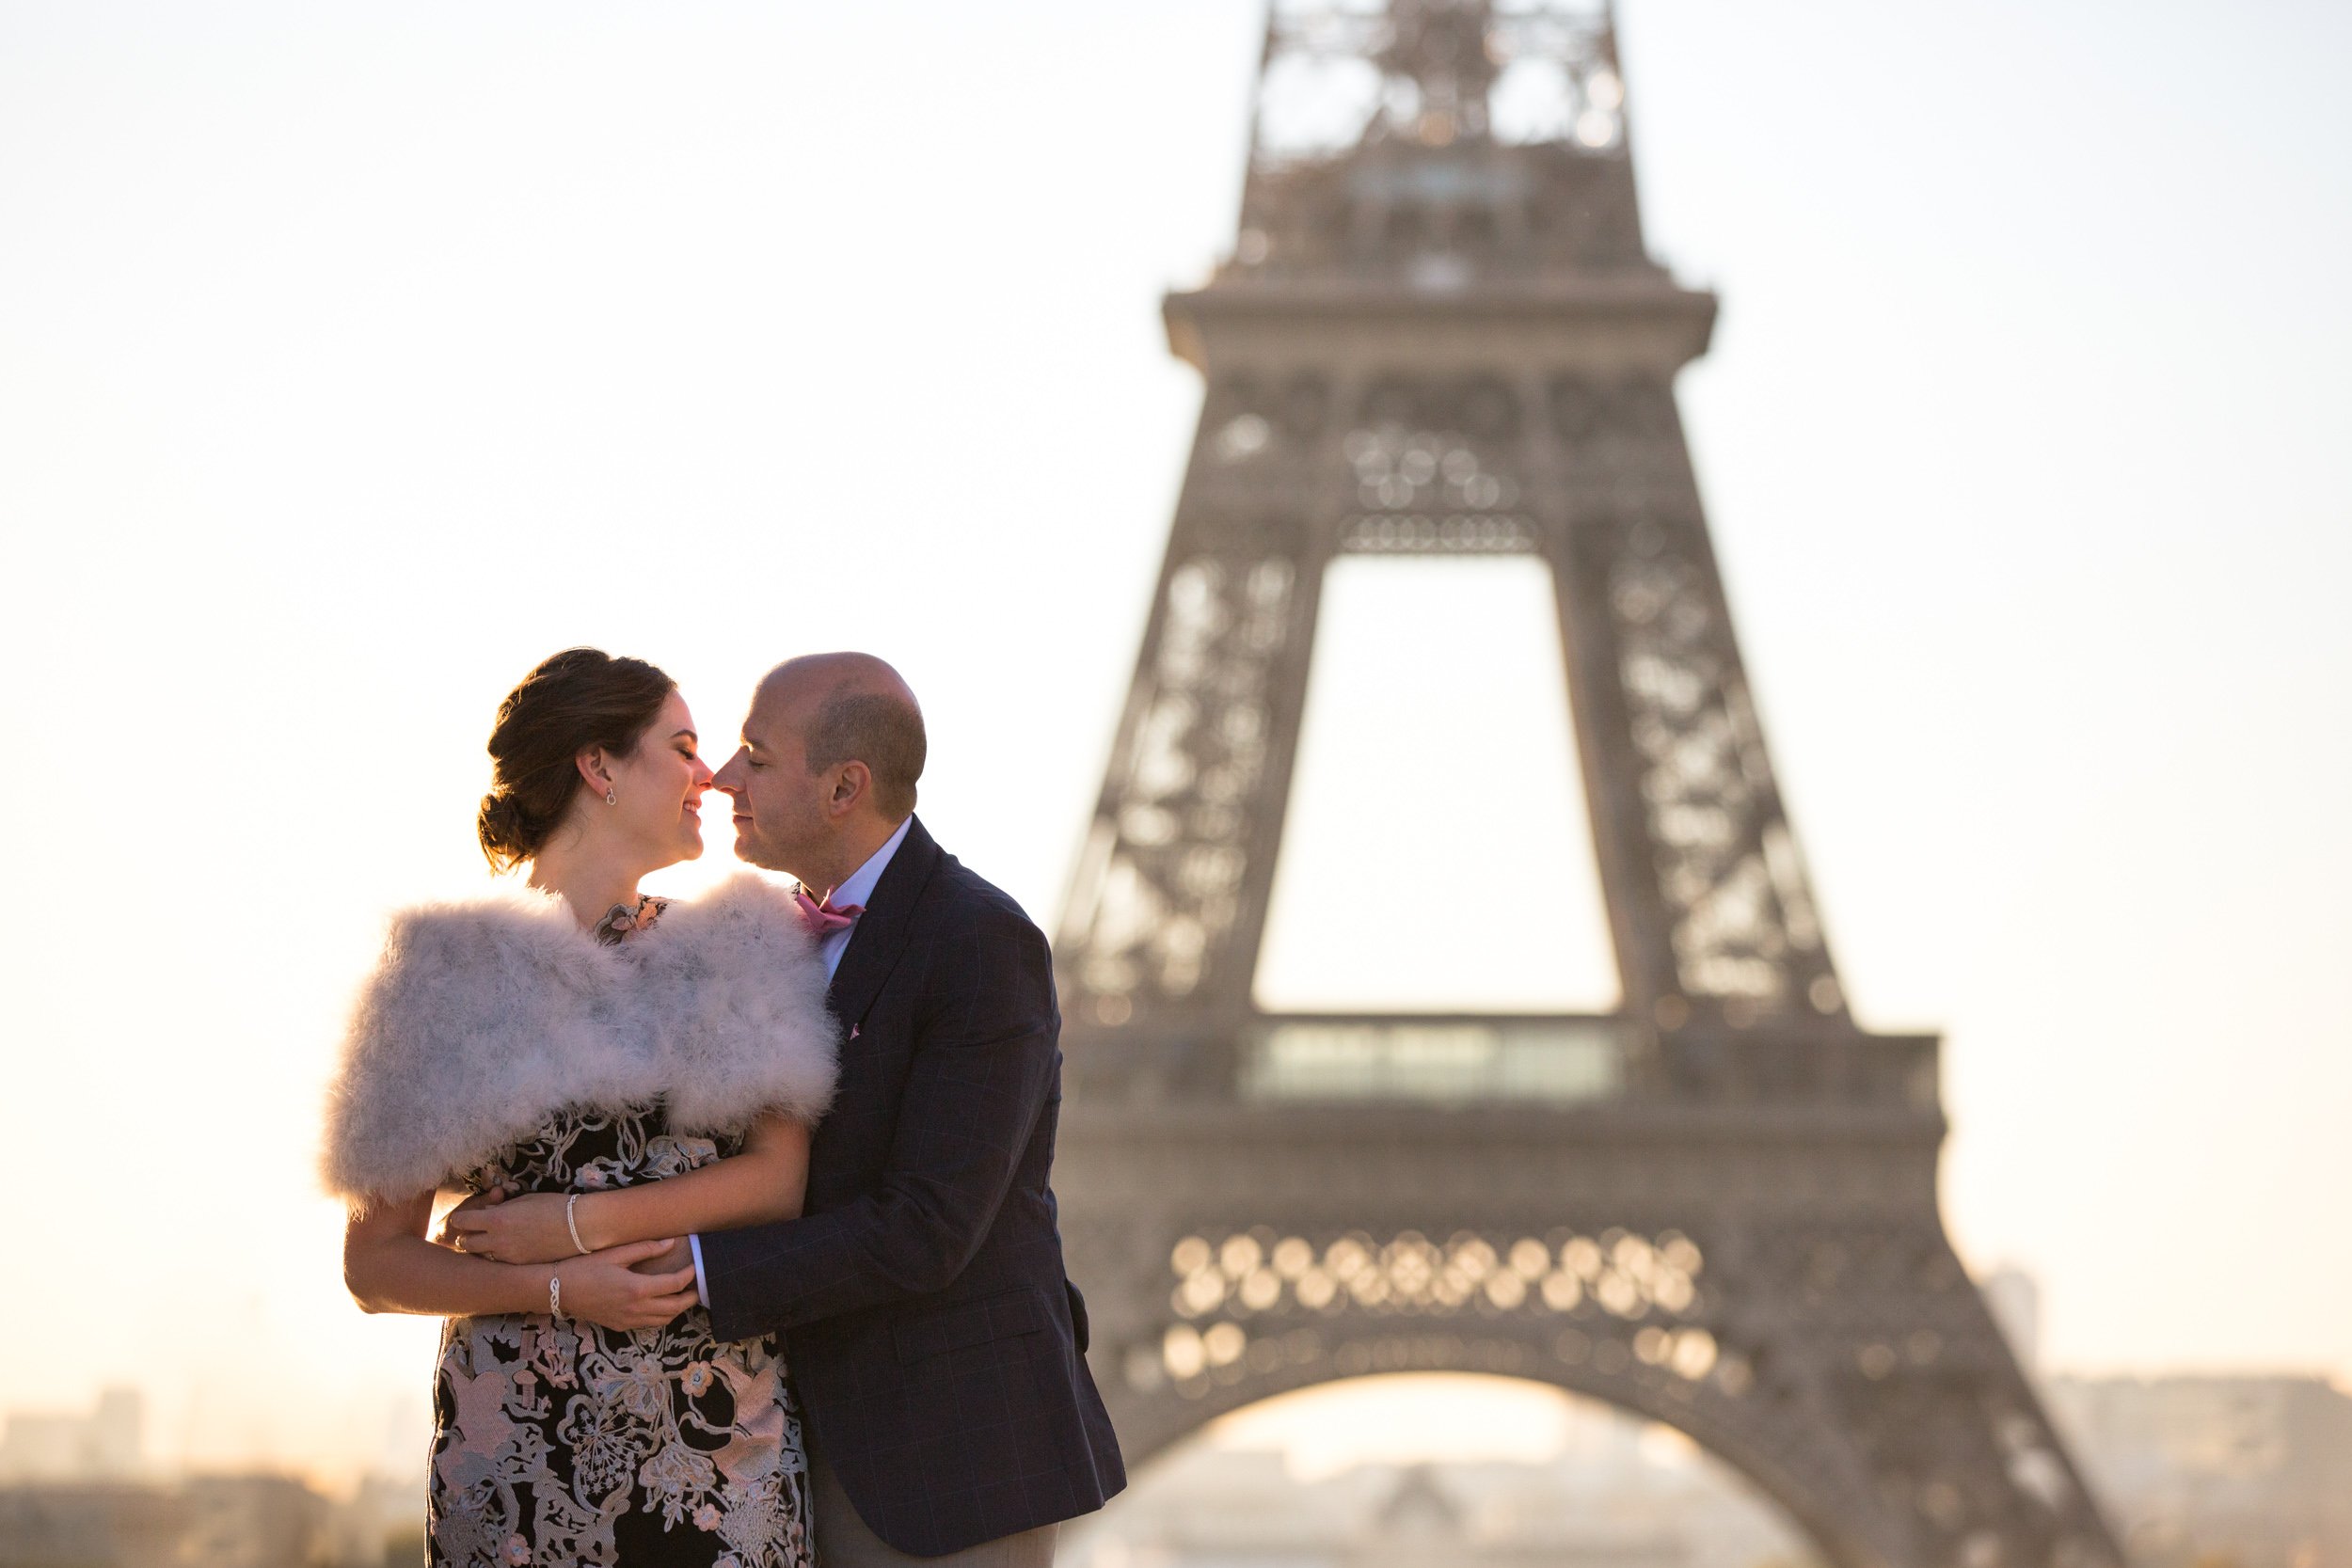  couple-embrace-by-eiffel-tower-at-golden-hour 